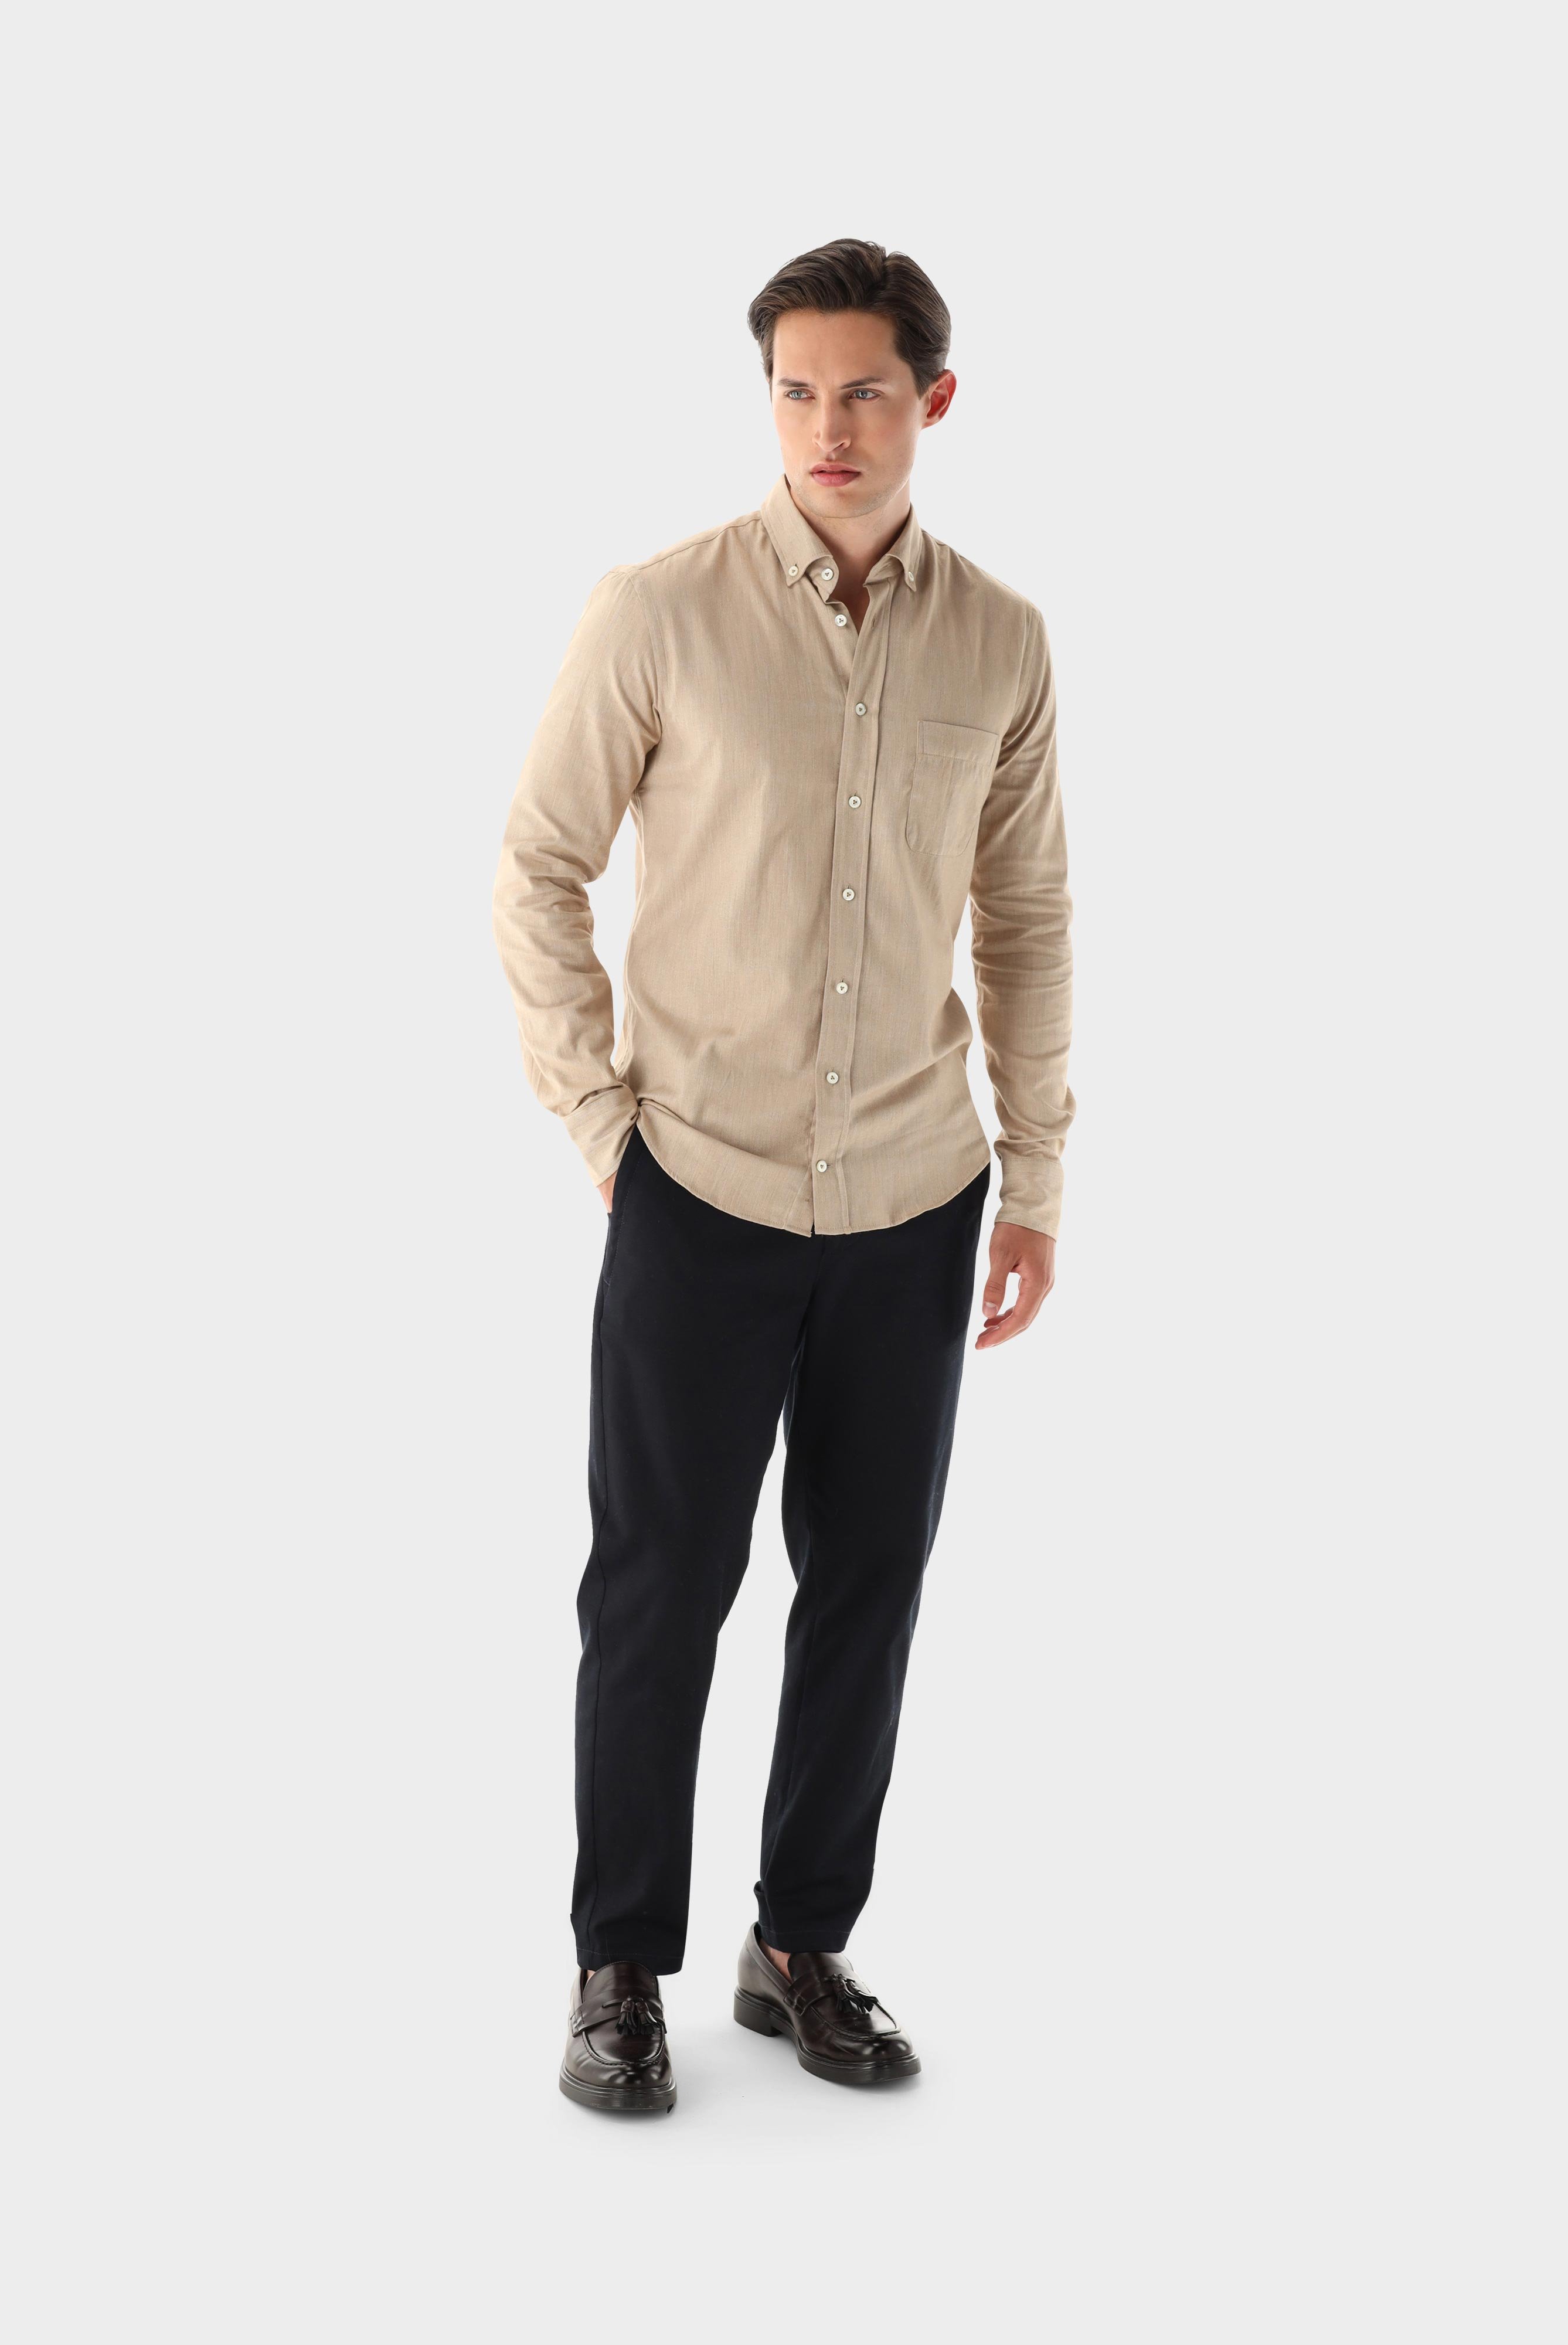 Casual Hemden+Button-Down Flanellhemd Tailor Fit+20.2013.9V.155045.130.40